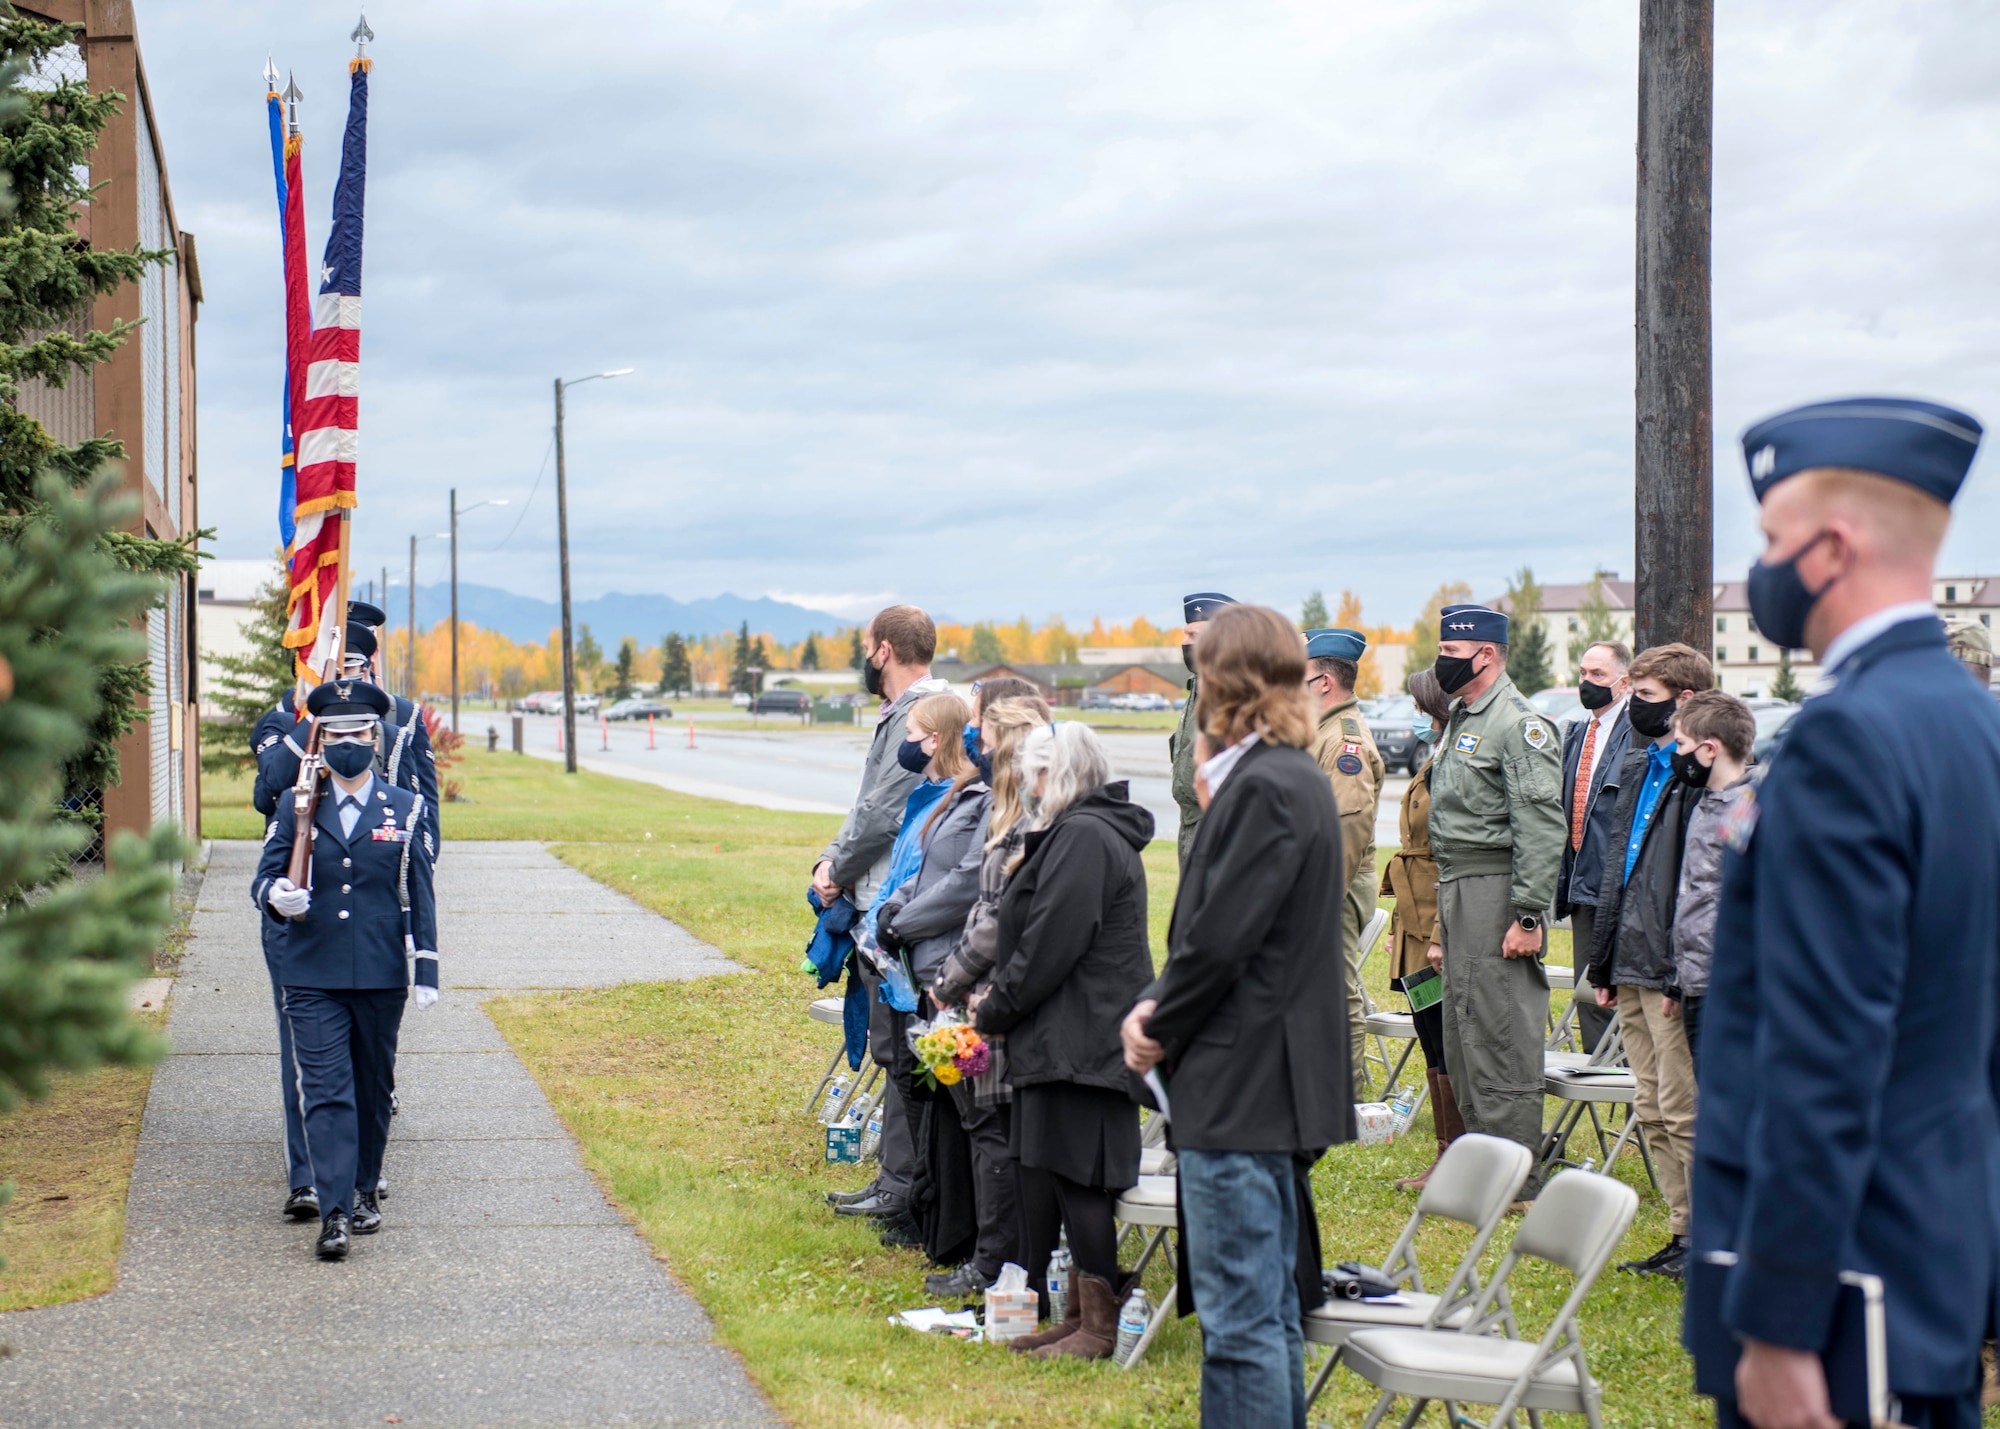 Surviving family members, distinguished guests and members of 962nd Airborne Air Control Squadron attend the Yukla 27 25th anniversary memorial ceremony at Joint Base Elmendorf-Richardson, Alaska, Sept. 22, 2020. Yukla 27, a U.S. Air Force E-3 Sentry airborne warning and control system aircraft assigned to the 962nd AACS, encountered a flock of geese Sept. 22, 1995, and crashed shortly after takeoff on a routine surveillance training sortie, killing all 24 Canadian and U.S. Airmen aboard.